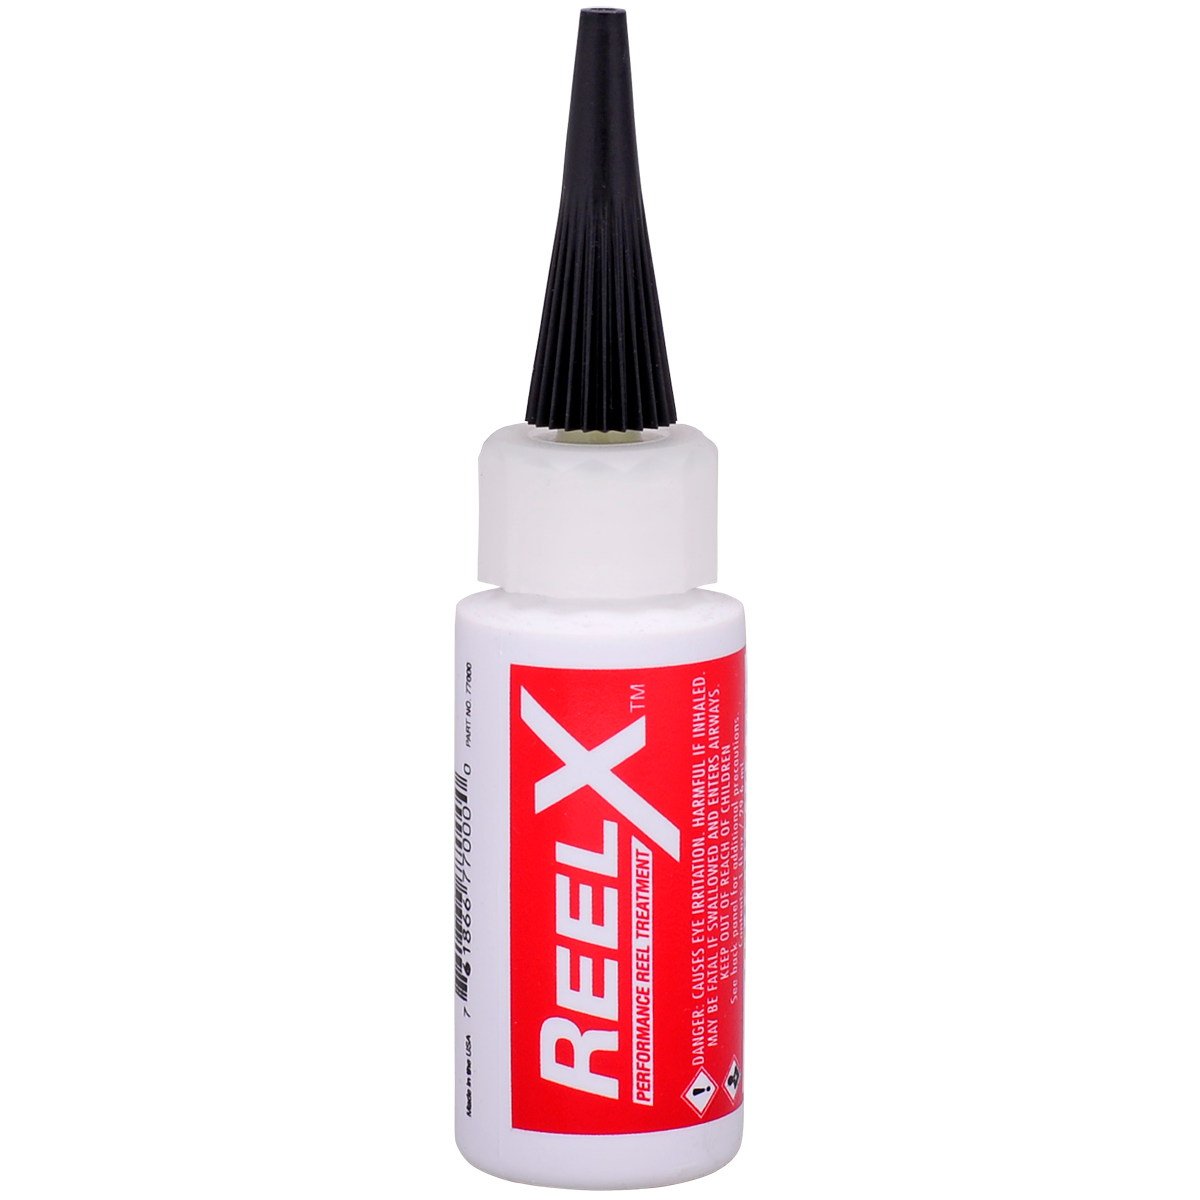 PRINxy Fishing Reel Oil Fishing Reel Grease,Provides Smooth And  Long-Lasting Lubrication For All Types Of Fishing Reels 14 8ML White B